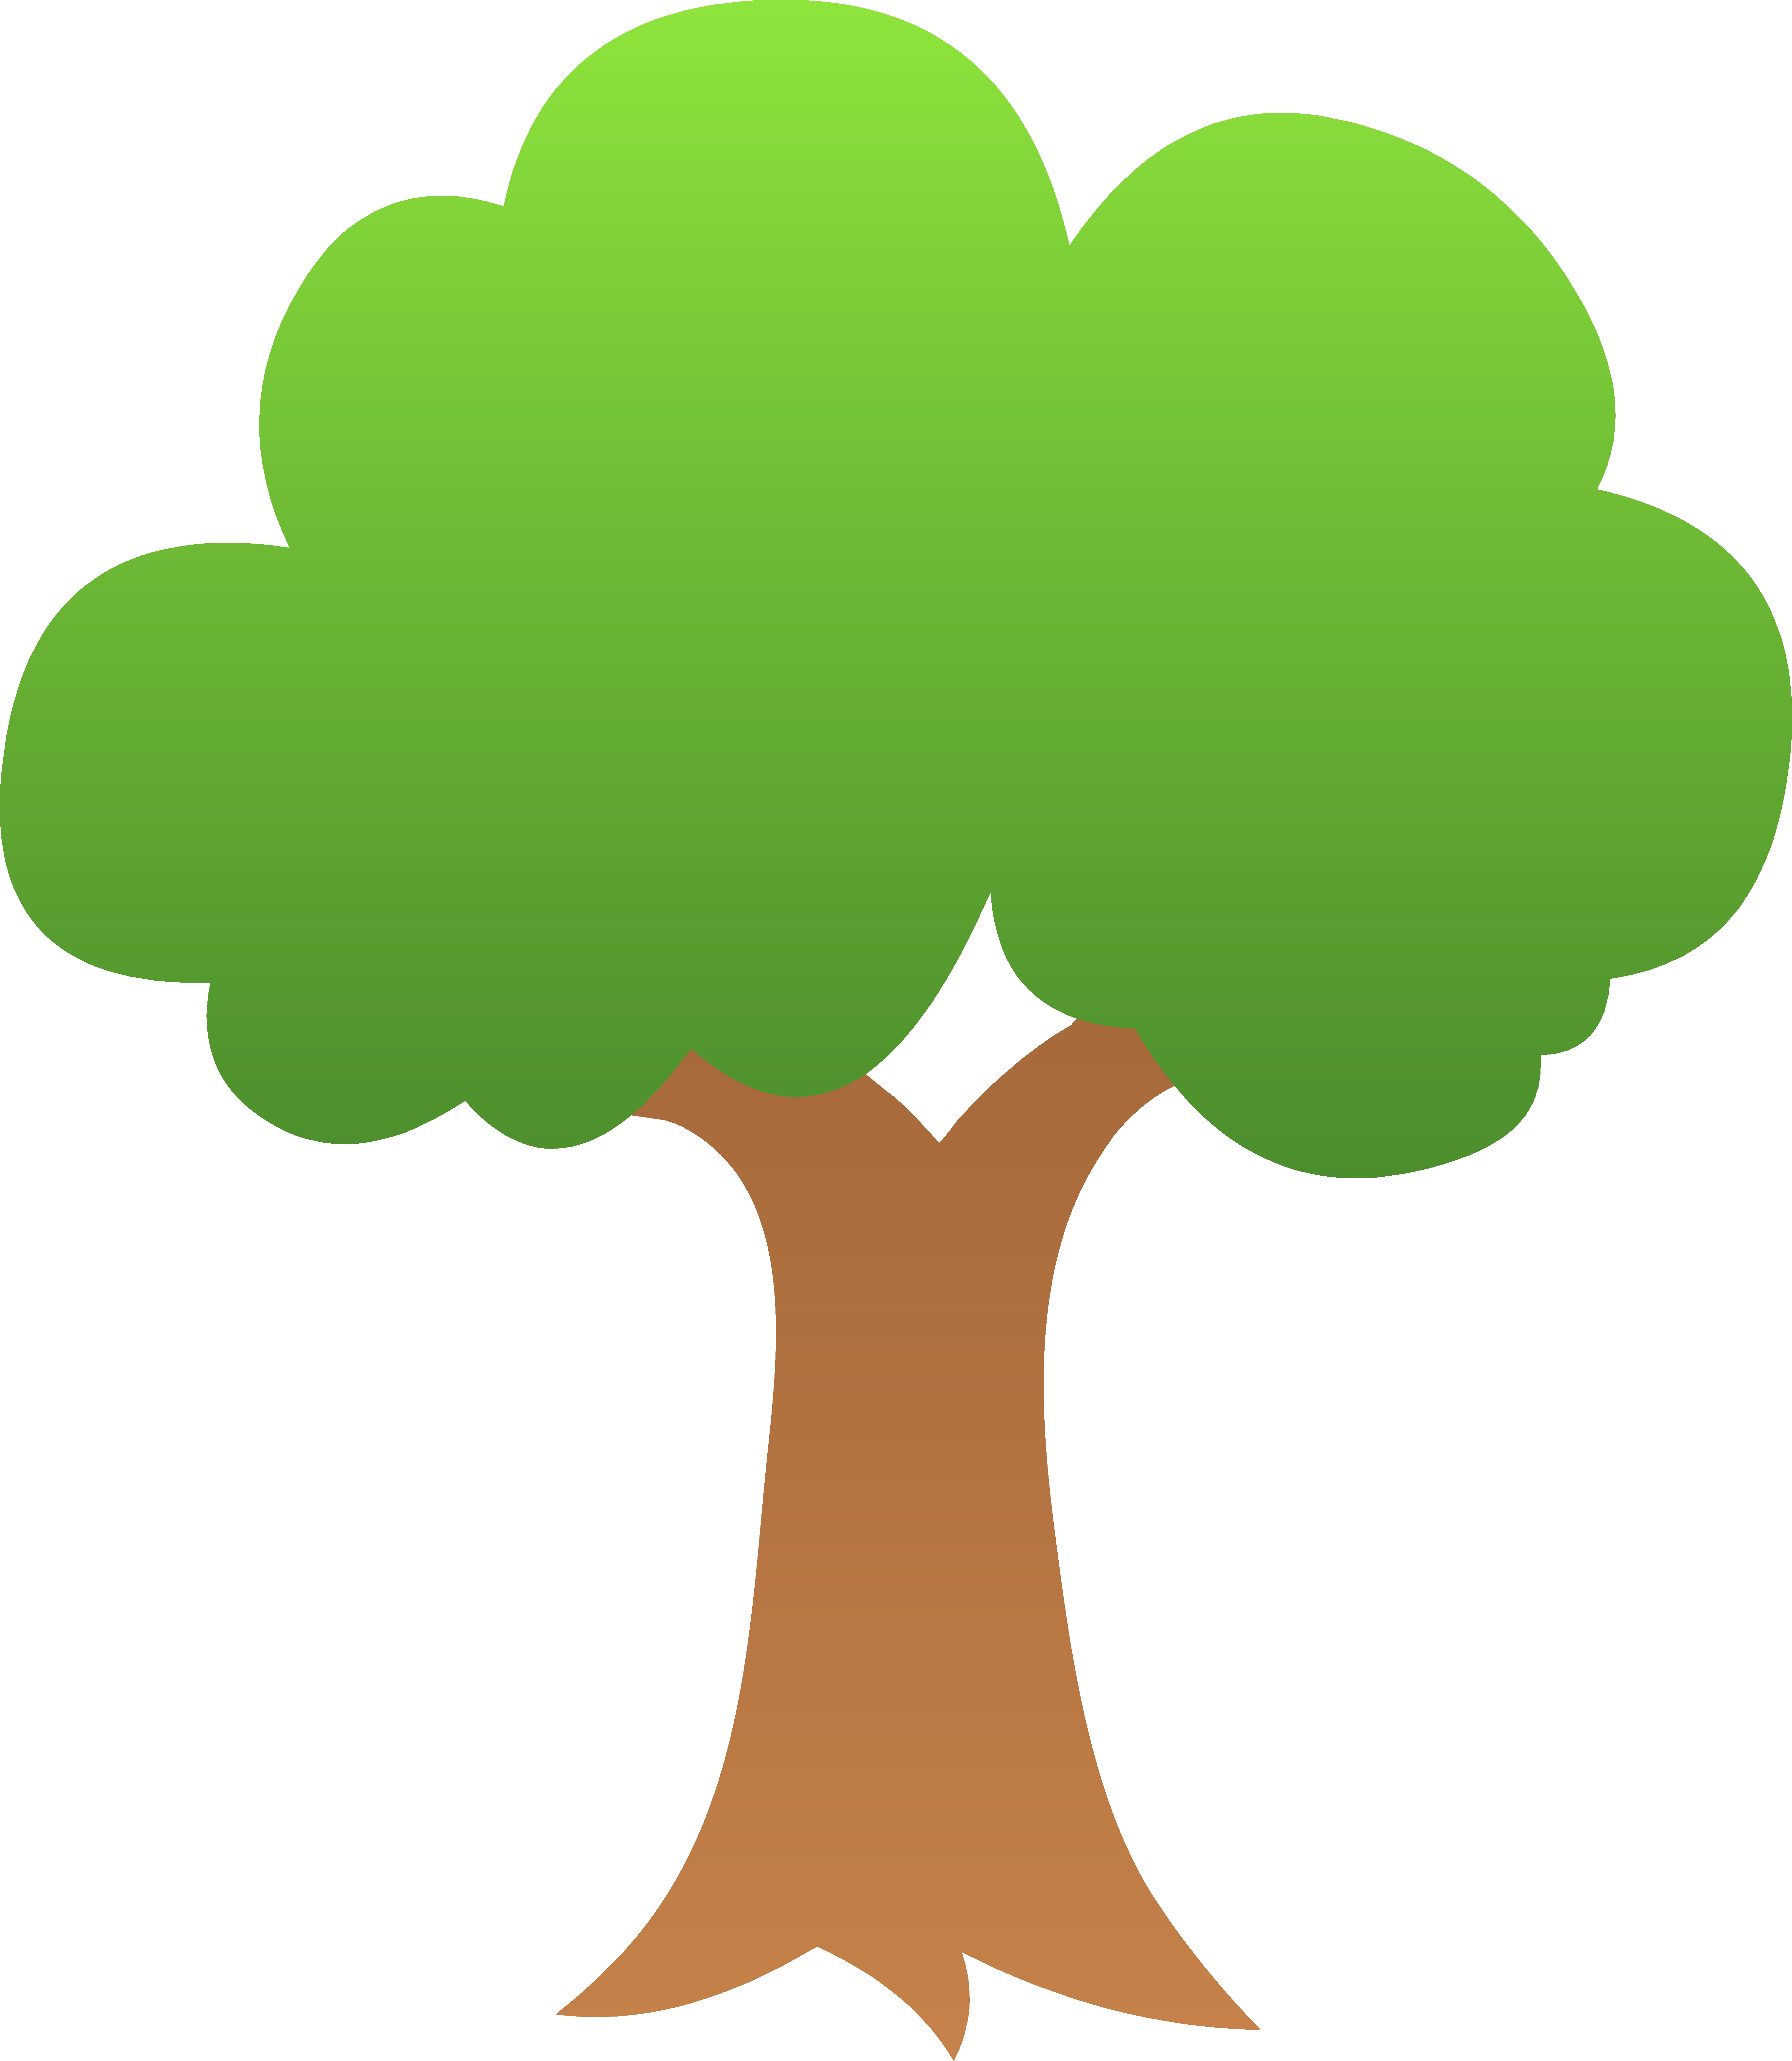 Tree Clip Art Free Downloads | Clipart library - Free Clipart Images